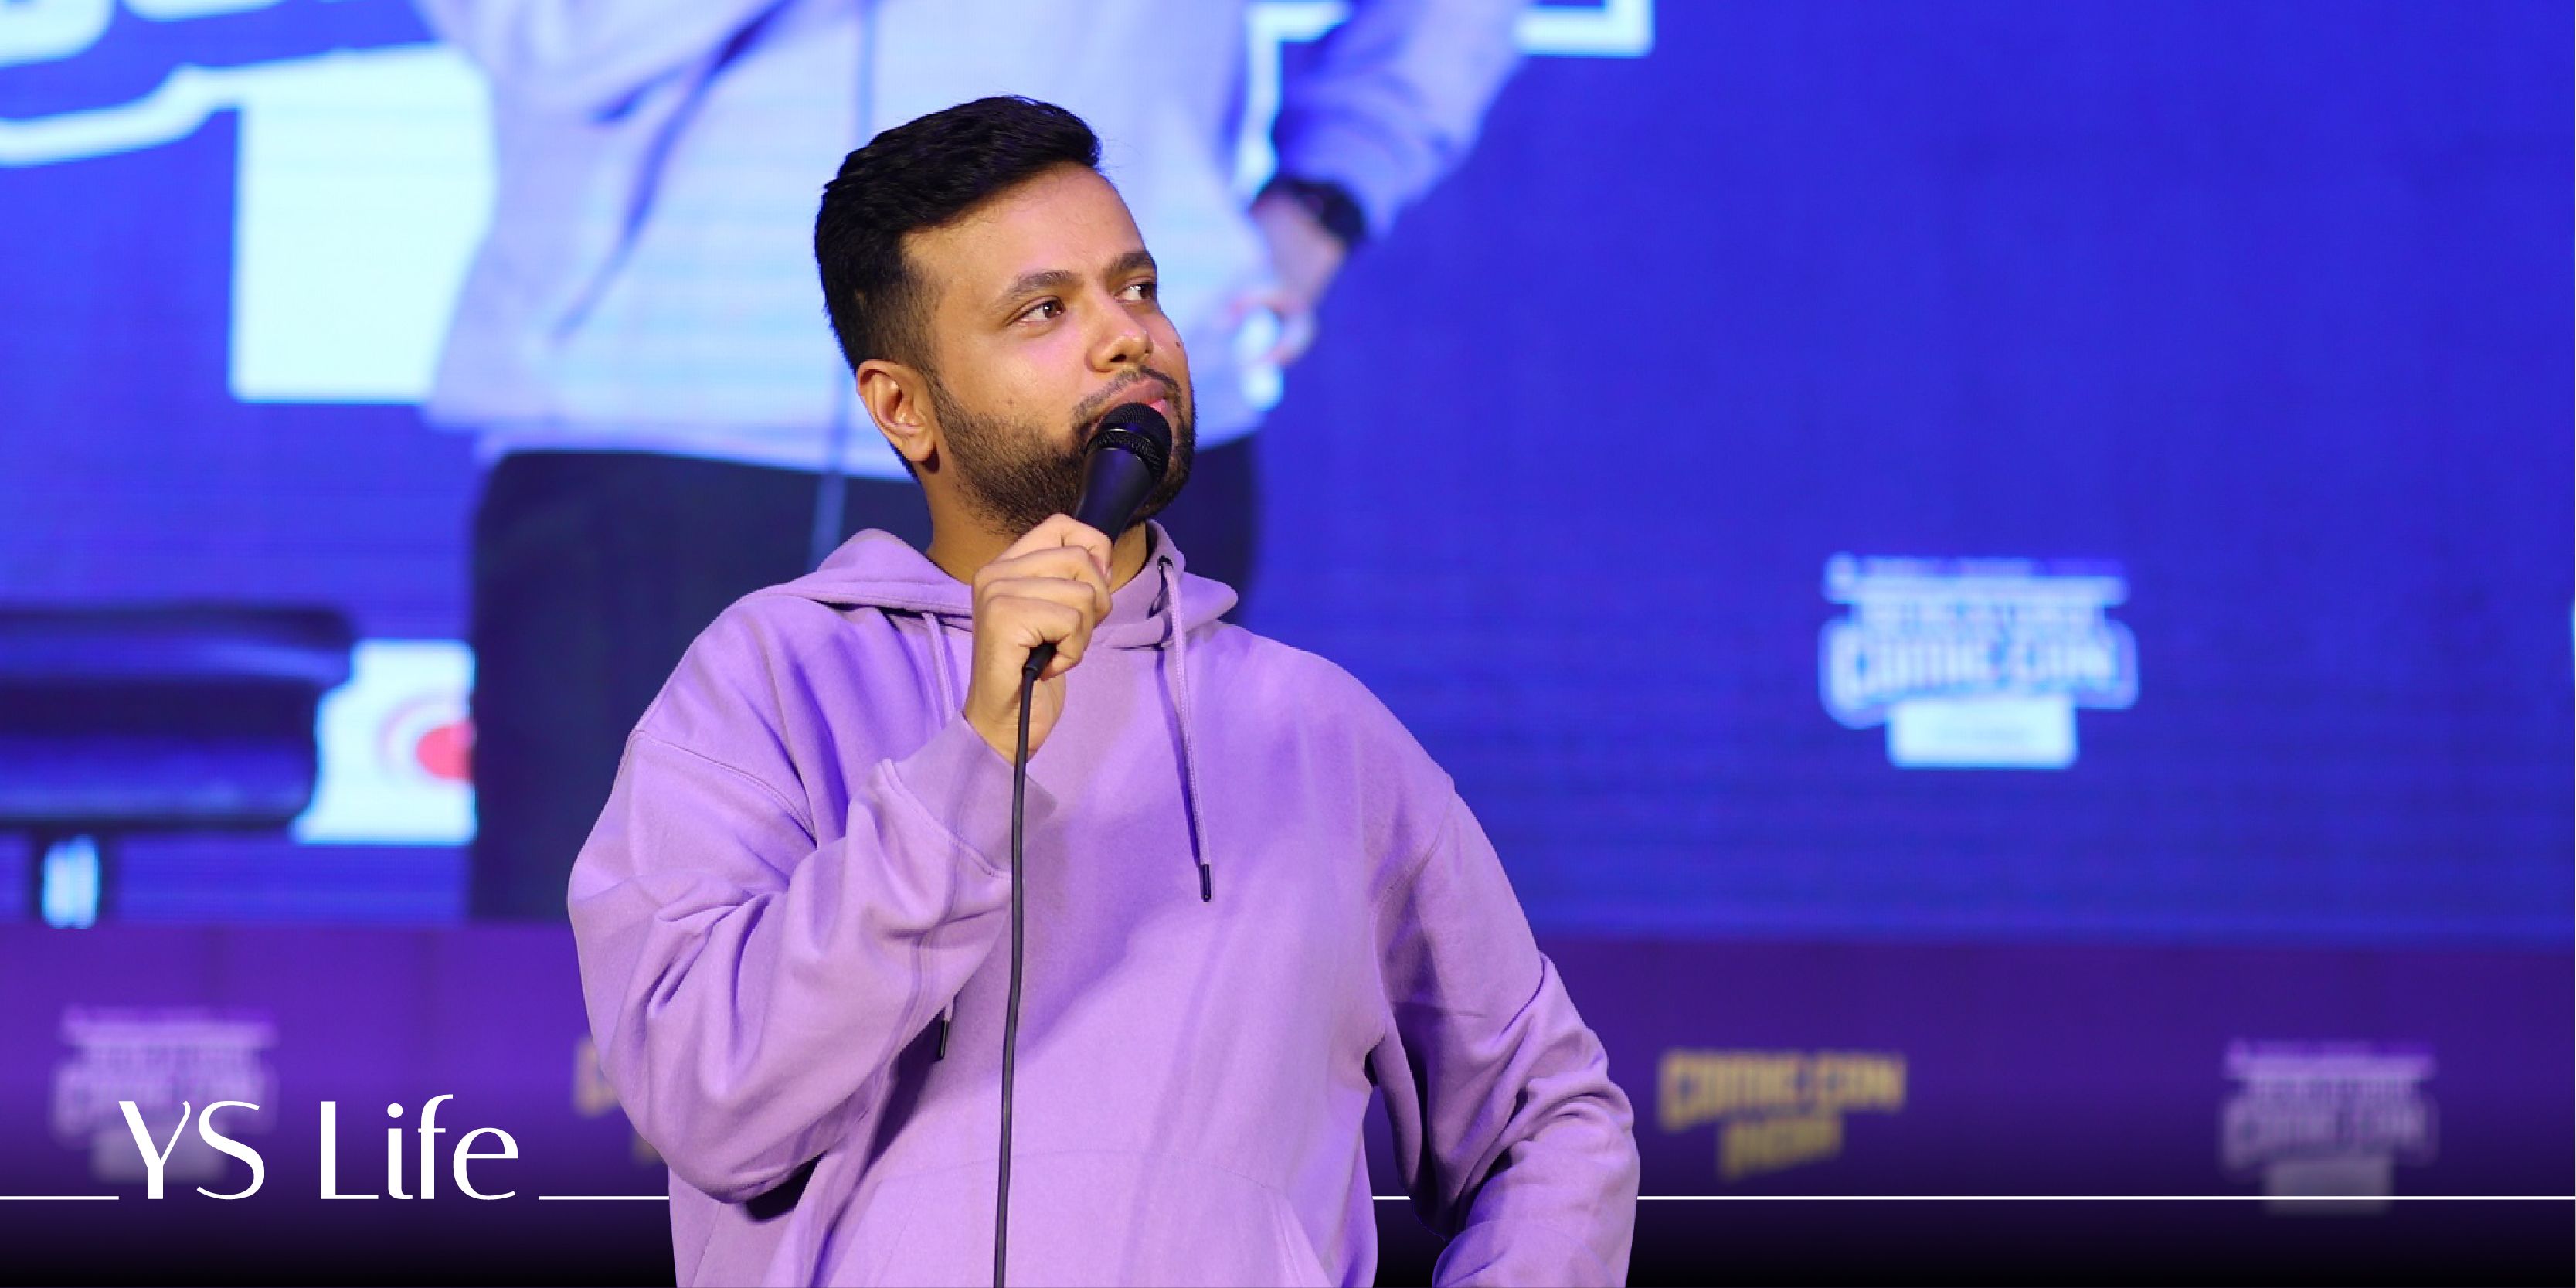 Standup comedy is all about trial and error, says Sapan Verma